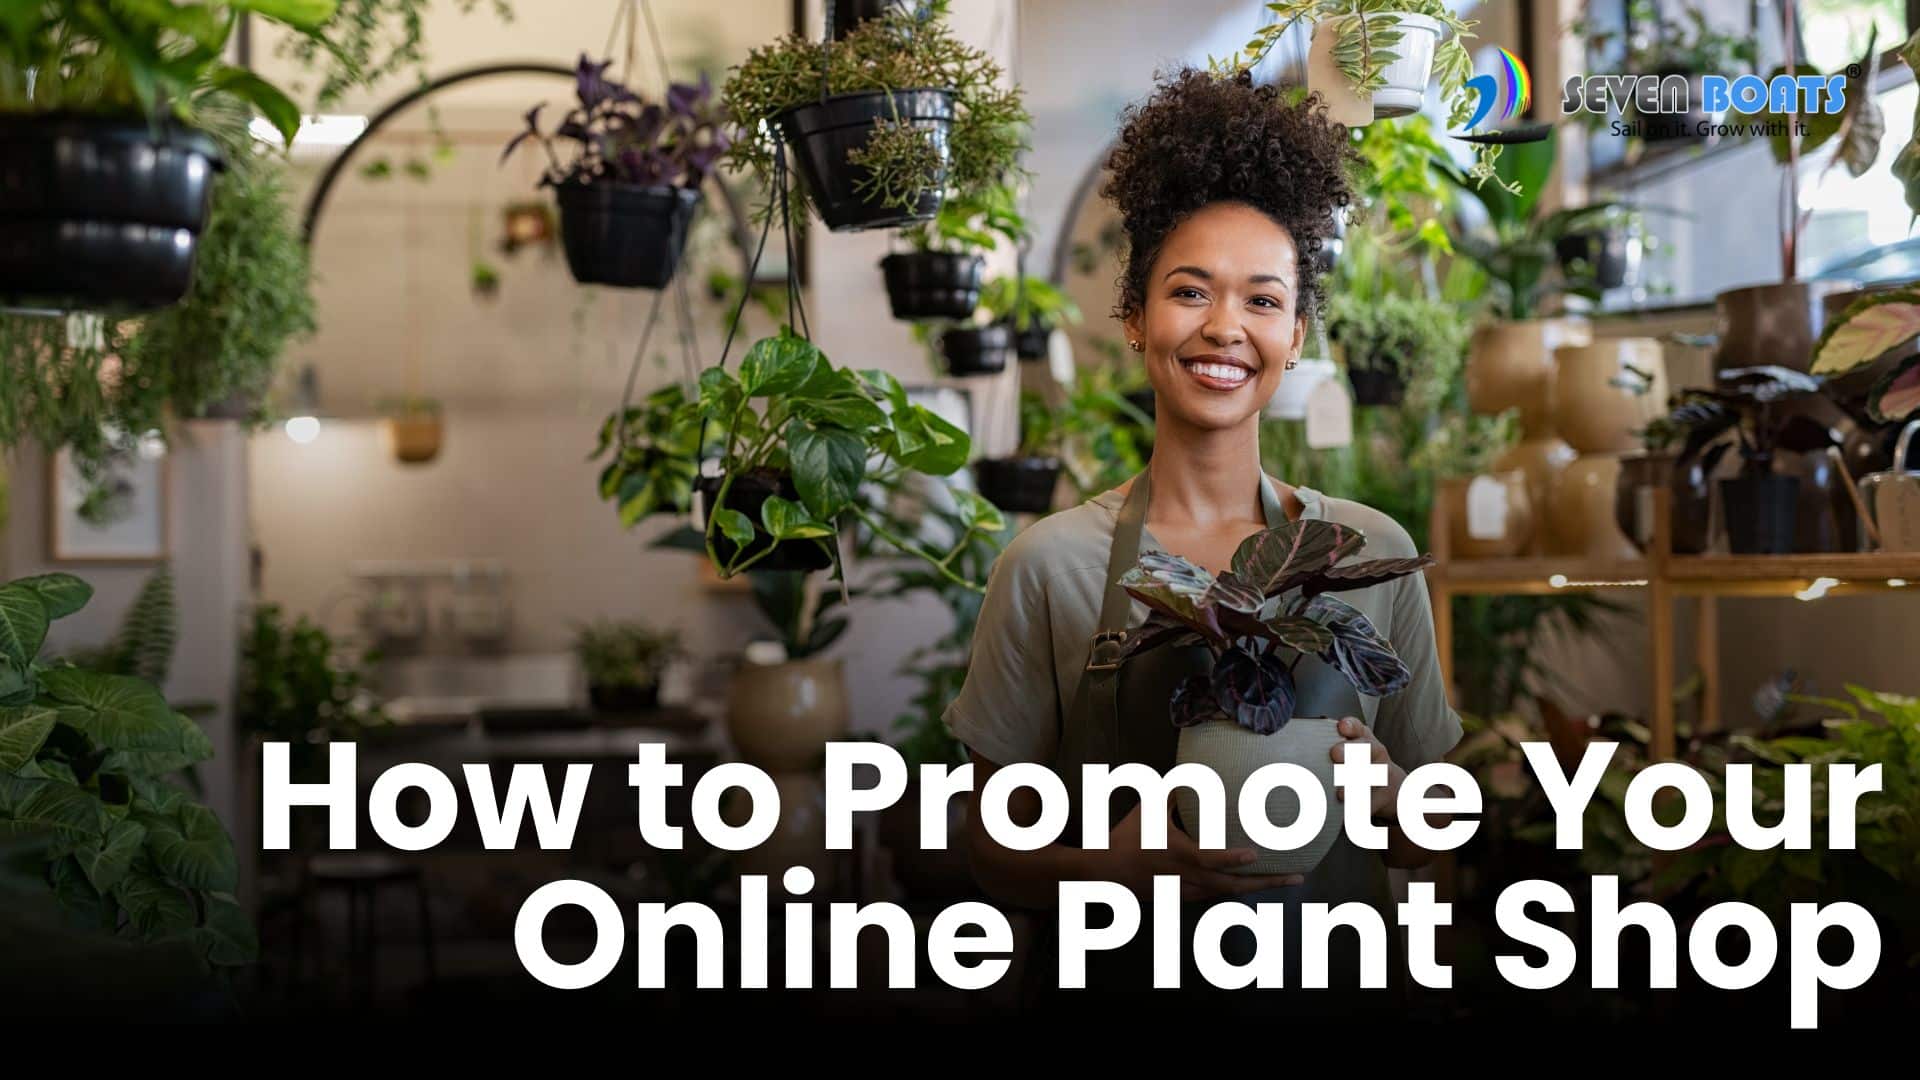 How to Promote Your Online Plant Shop - Banner